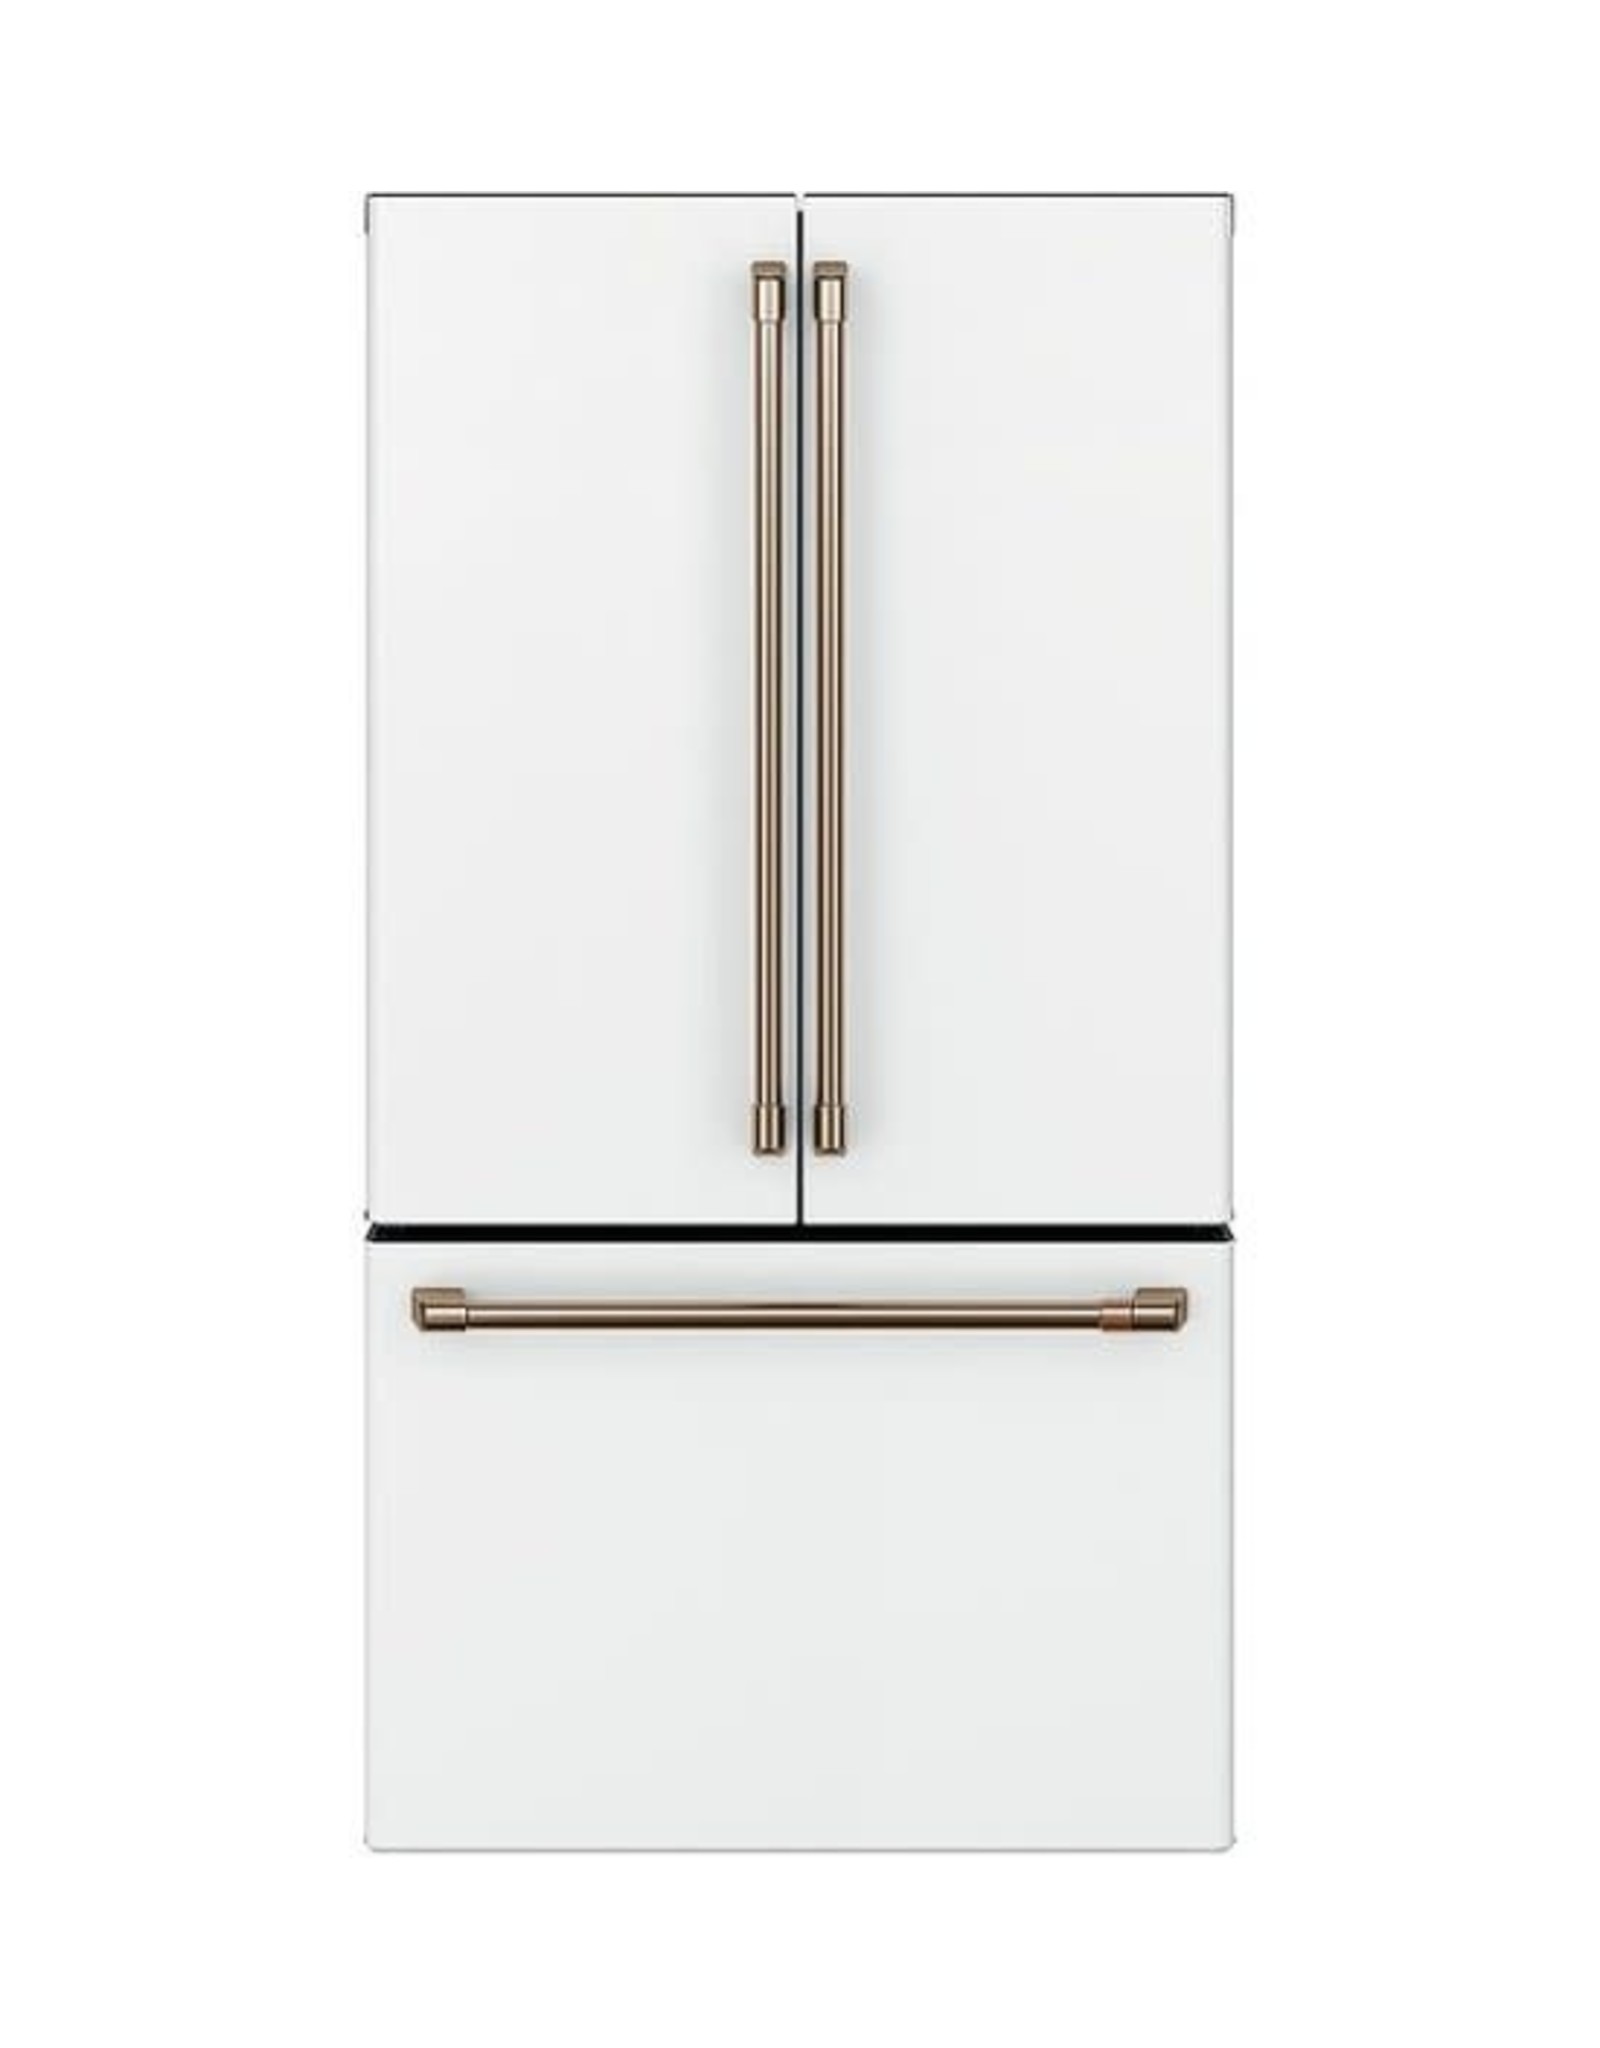 GE Cafe' CWE23SP4MW2 23.1 cu. ft. Smart French Door Refrigerator in Matte White, Counter Depth and ENERGY STAR